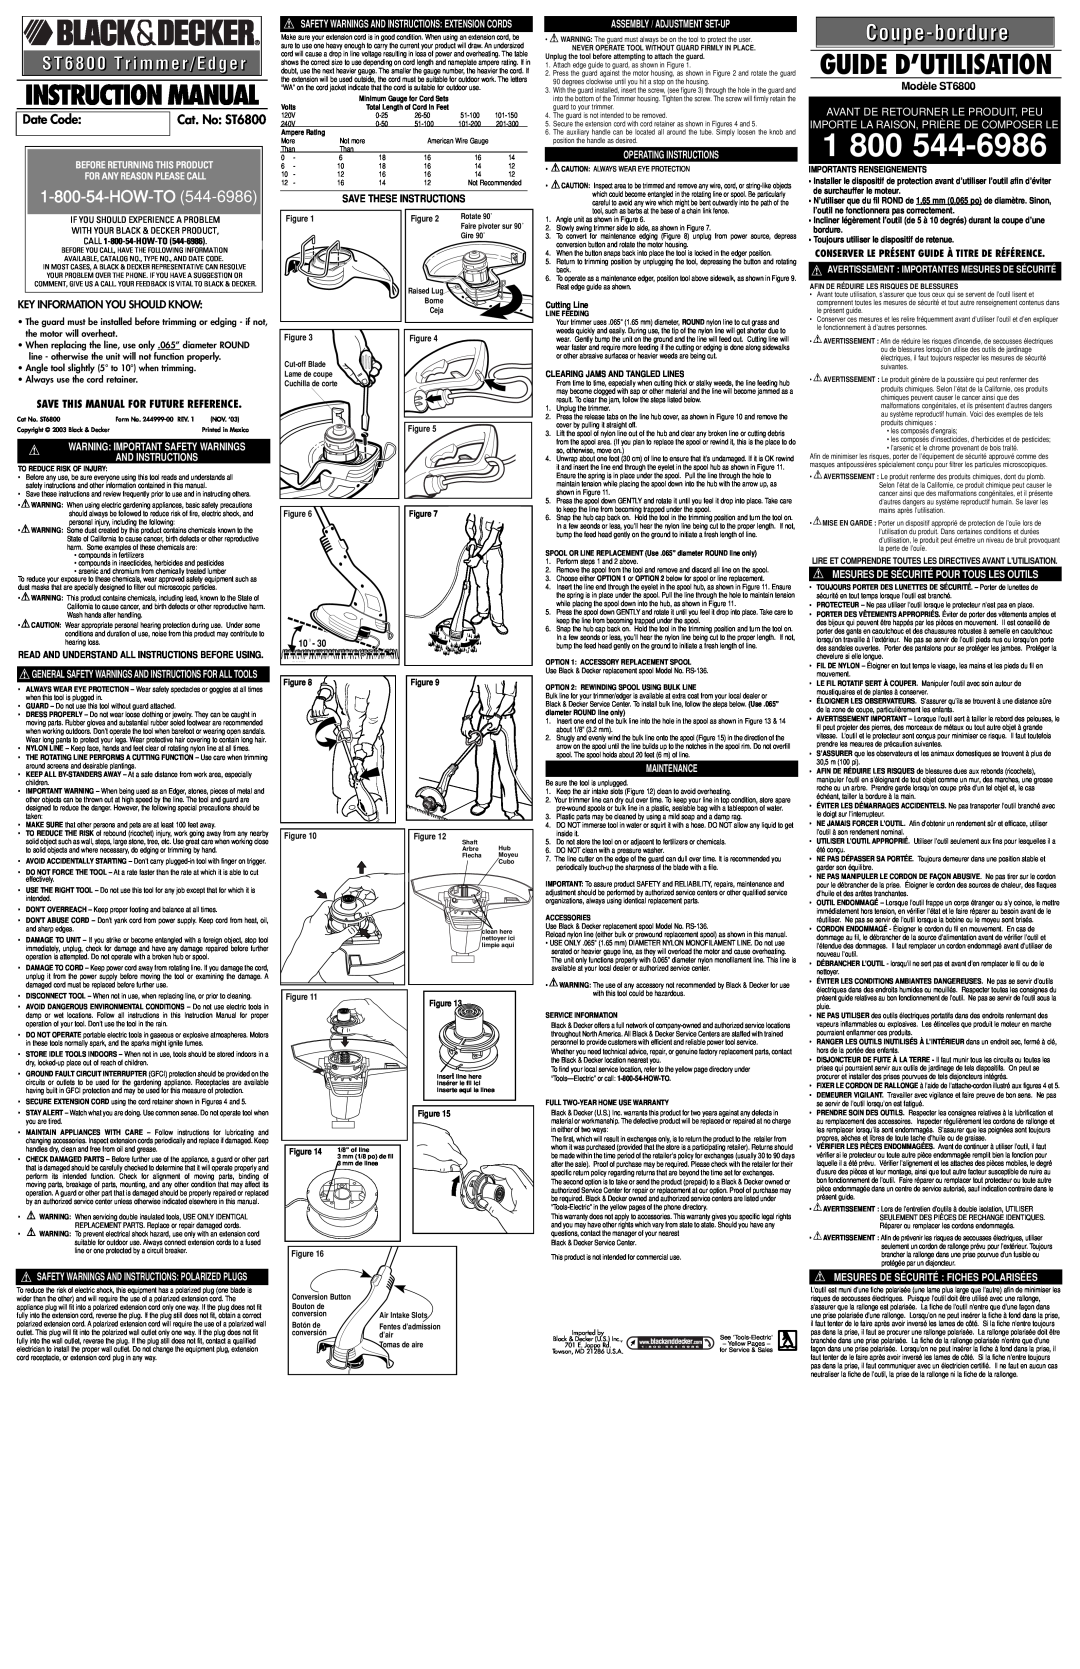 Black & Decker 244999-00 instruction manual Save These Instructions, Assembly / Adjustment Set-Up, Operating Instructions 